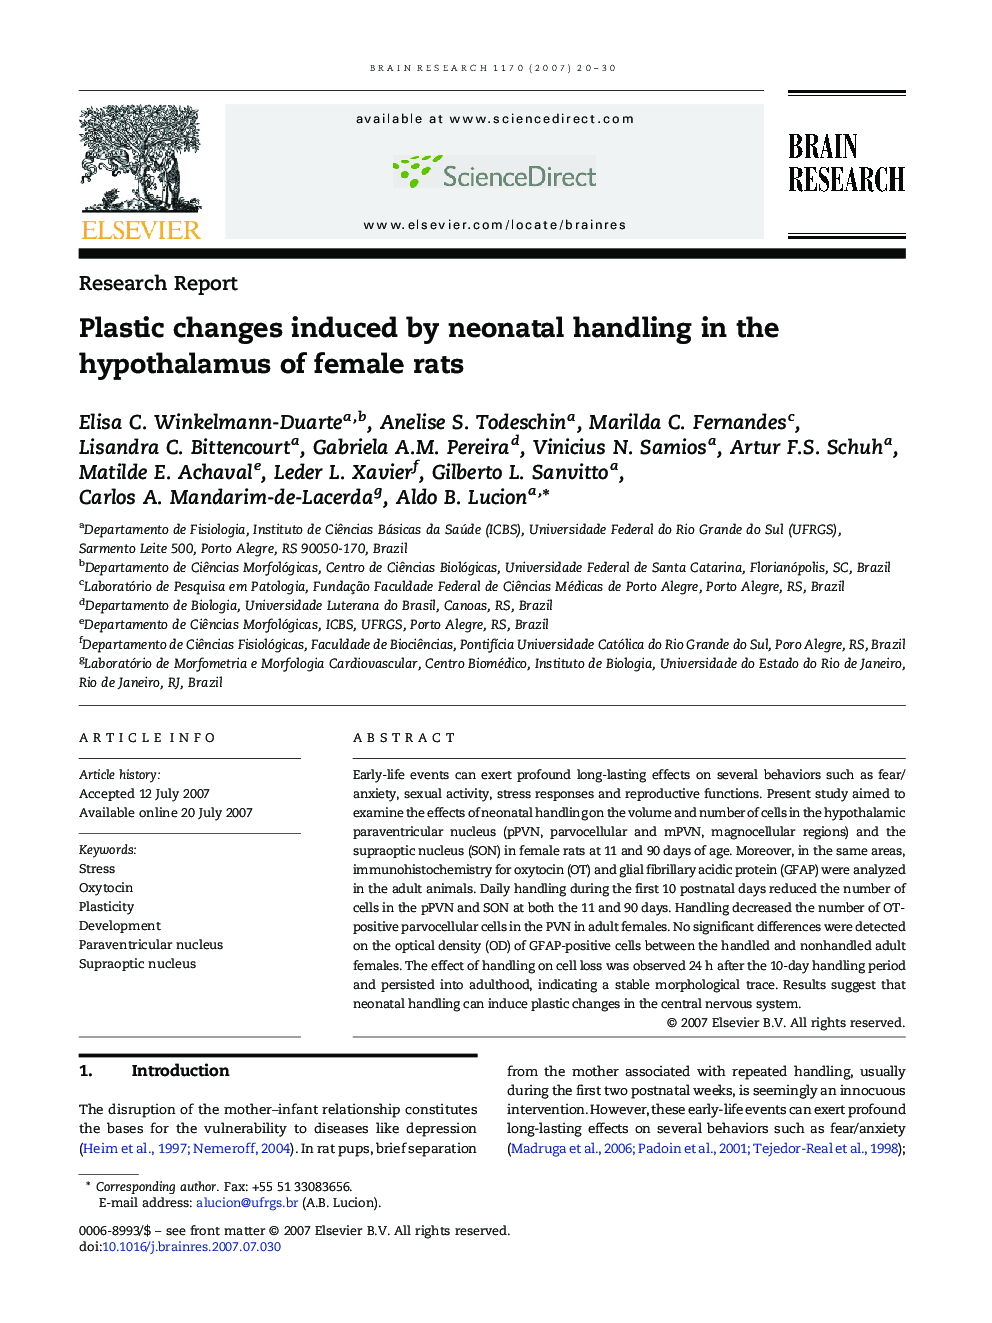 Plastic changes induced by neonatal handling in the hypothalamus of female rats